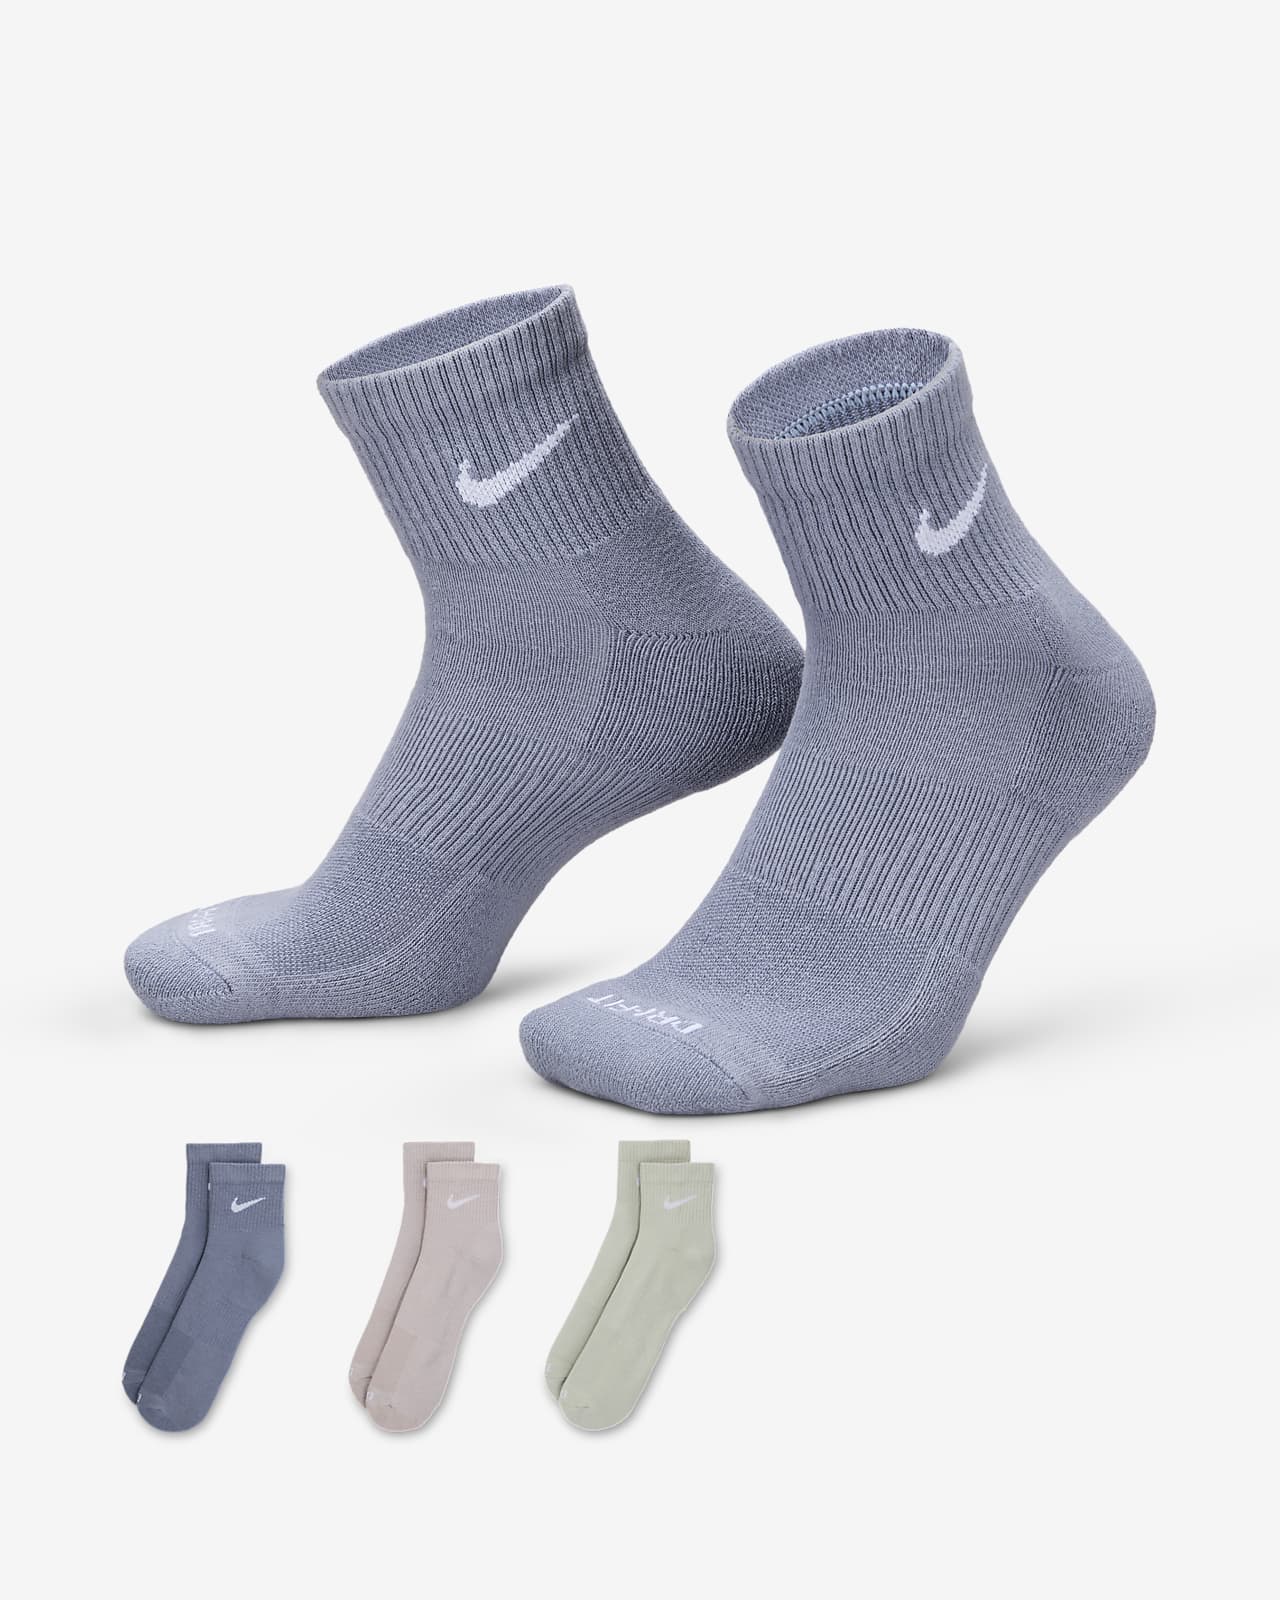 Chaussettes de training Nike Everyday Plus Cushioned (3 paires)